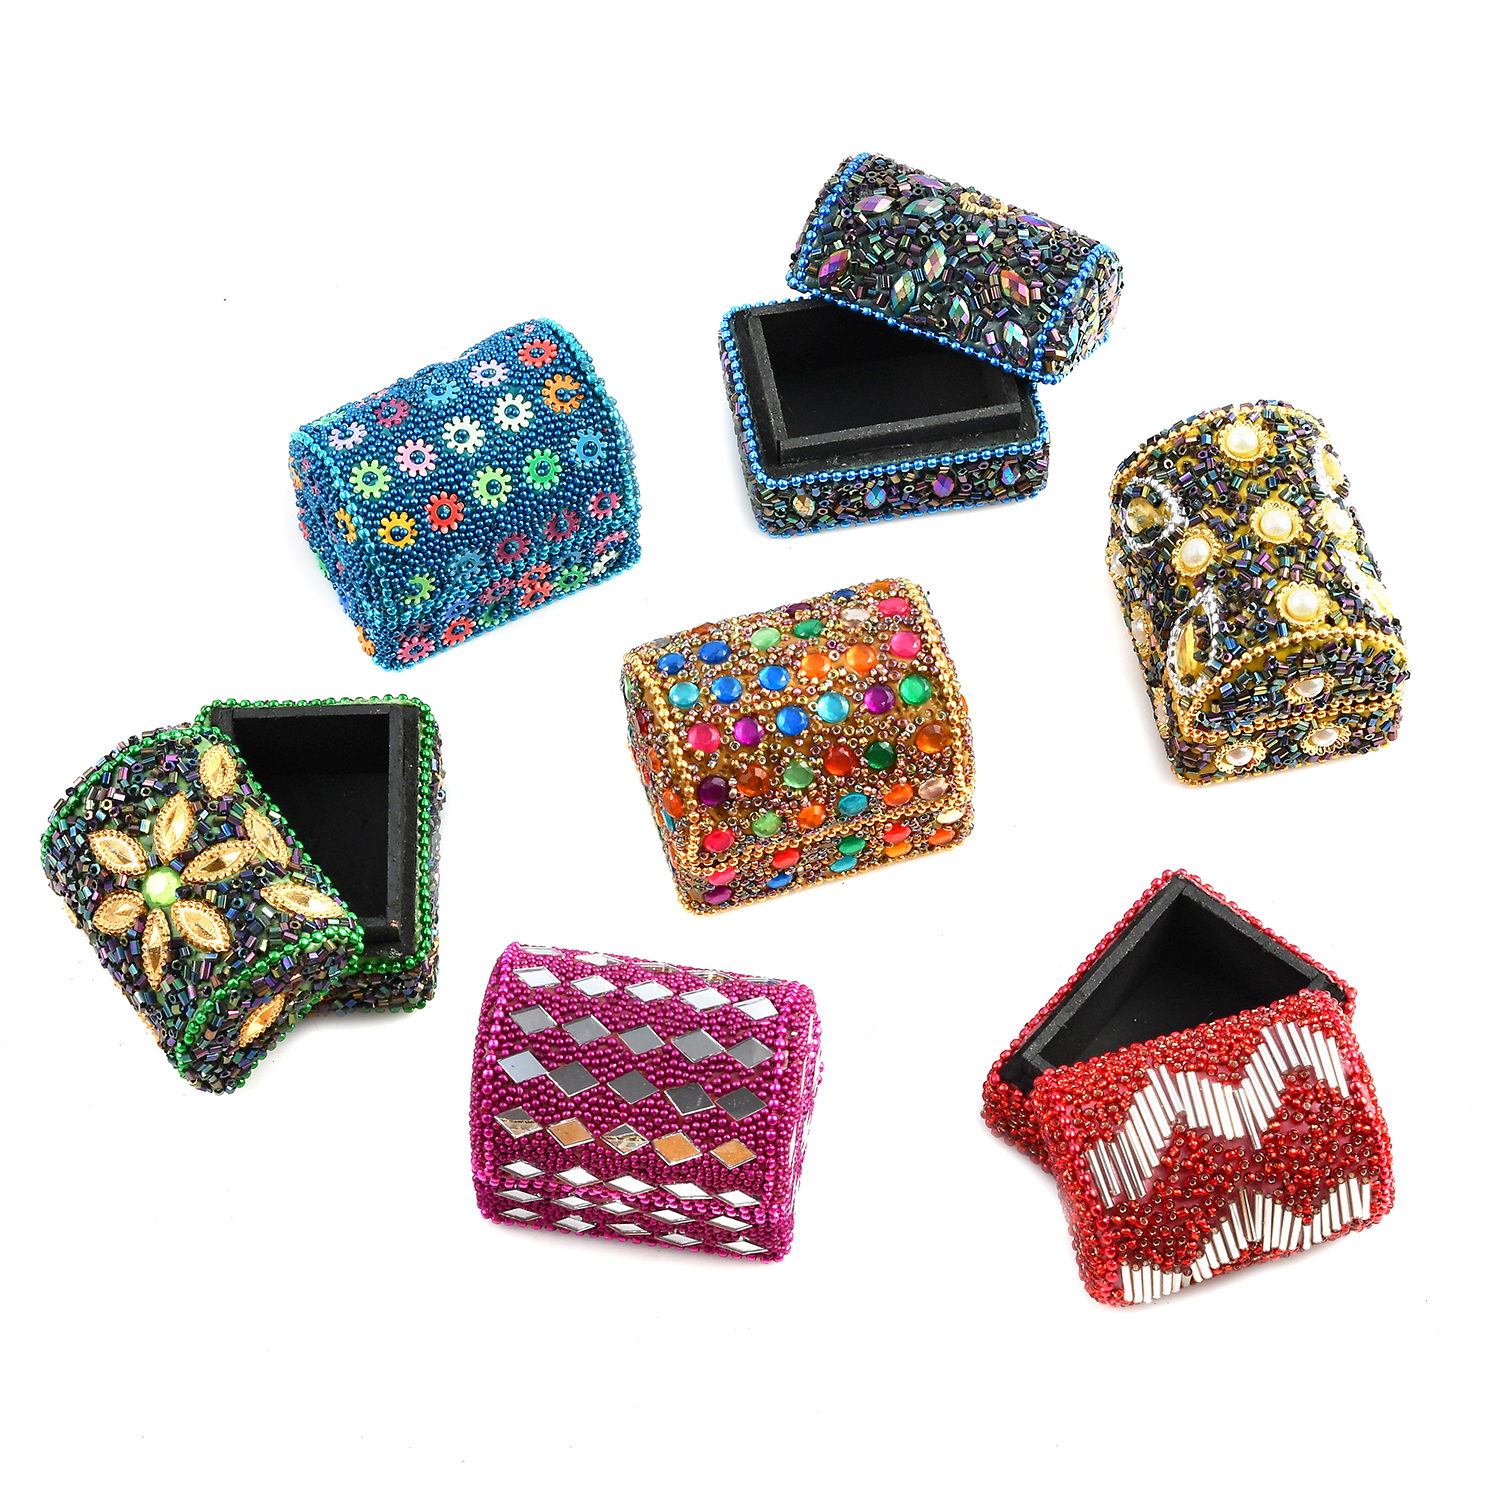 Shop LC Jewelry Holder Mini Treasure Chests Trinket Boxes Handcrafted Set  of Jewelry Gifts Keepsake Storage Box Multicolor Multi Beaded Wooden  Birthday Gifts